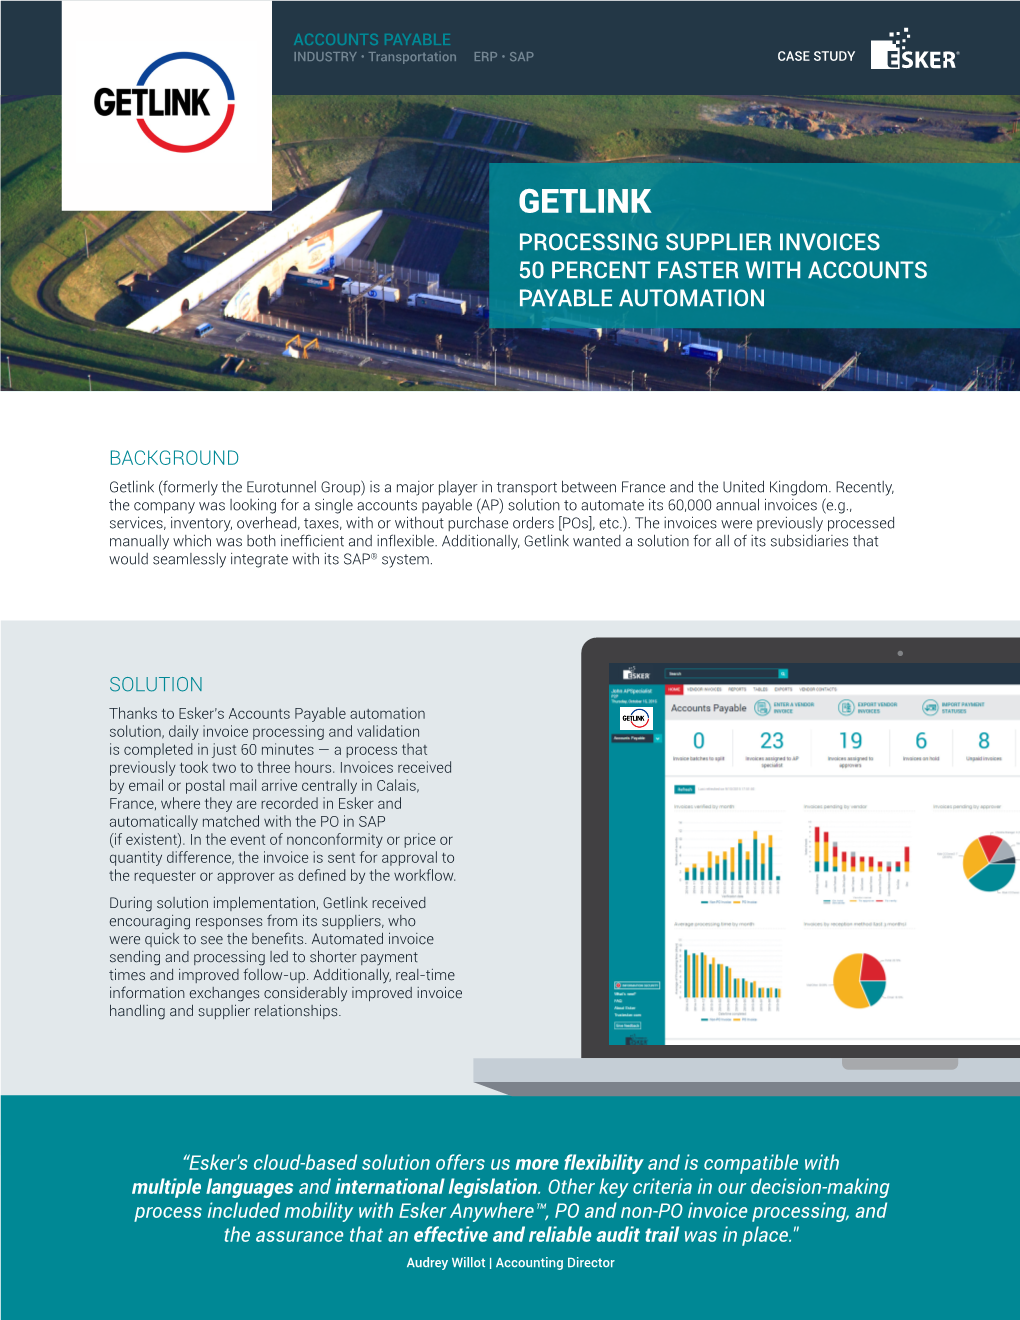 Getlink Processing Supplier Invoices 50 Percent Faster with Accounts Payable Automation